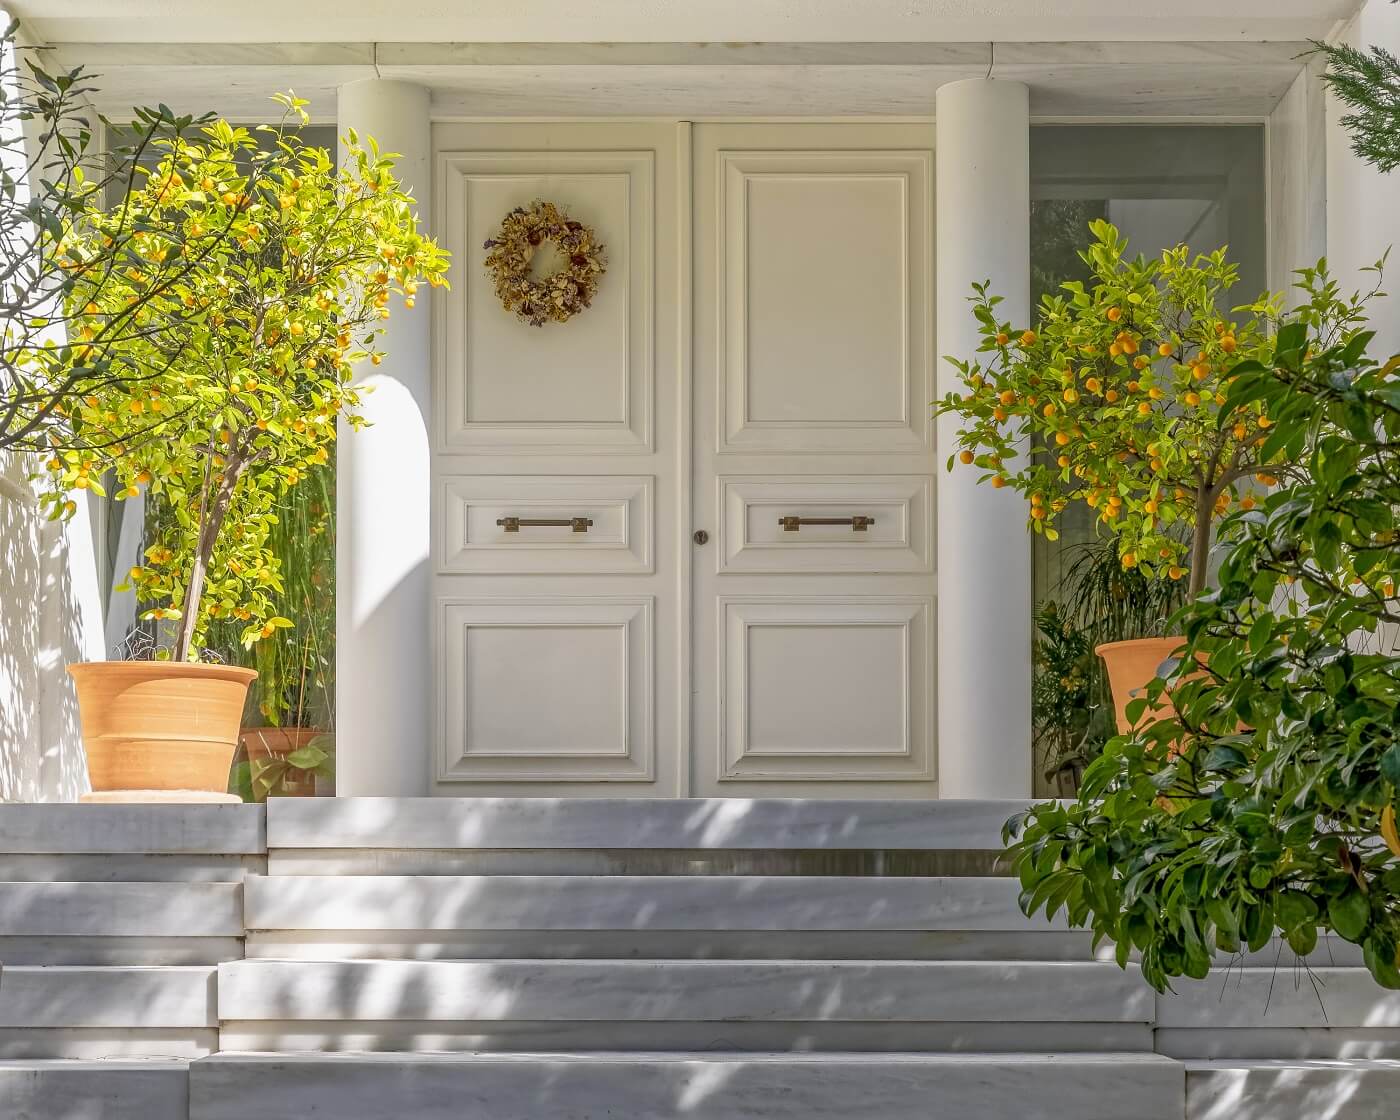 About the Front Door in Feng Shui